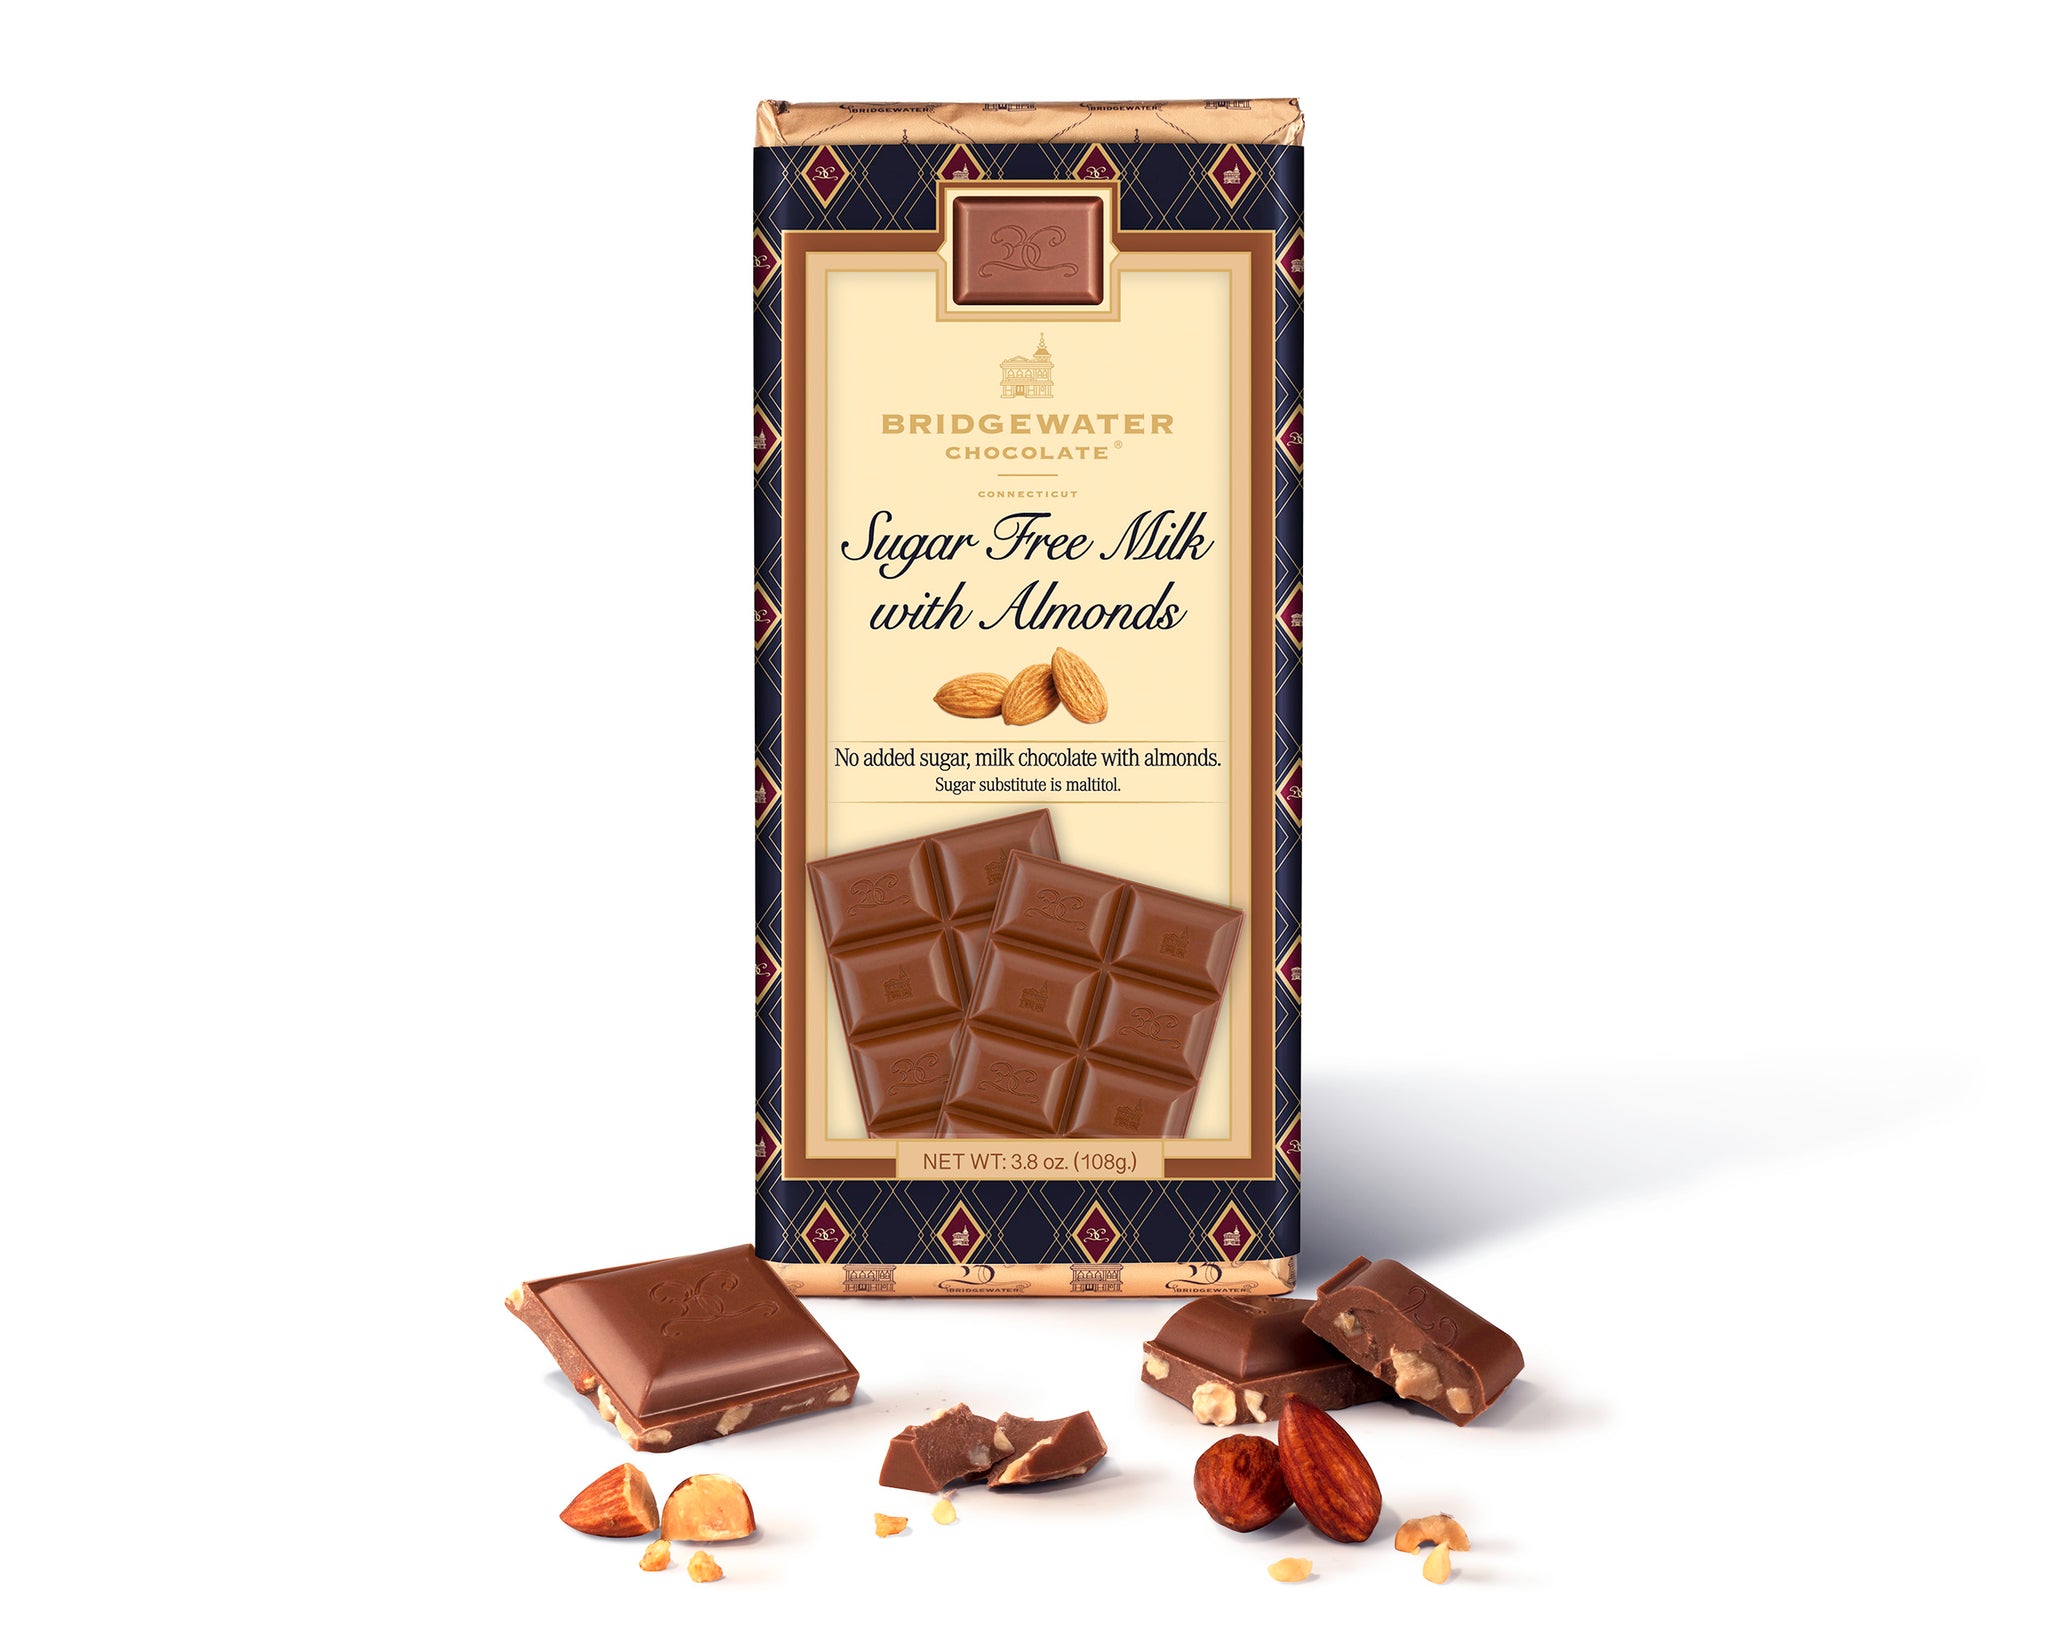 Premium Milk Chocolate Candy Bar with Peanut Butter